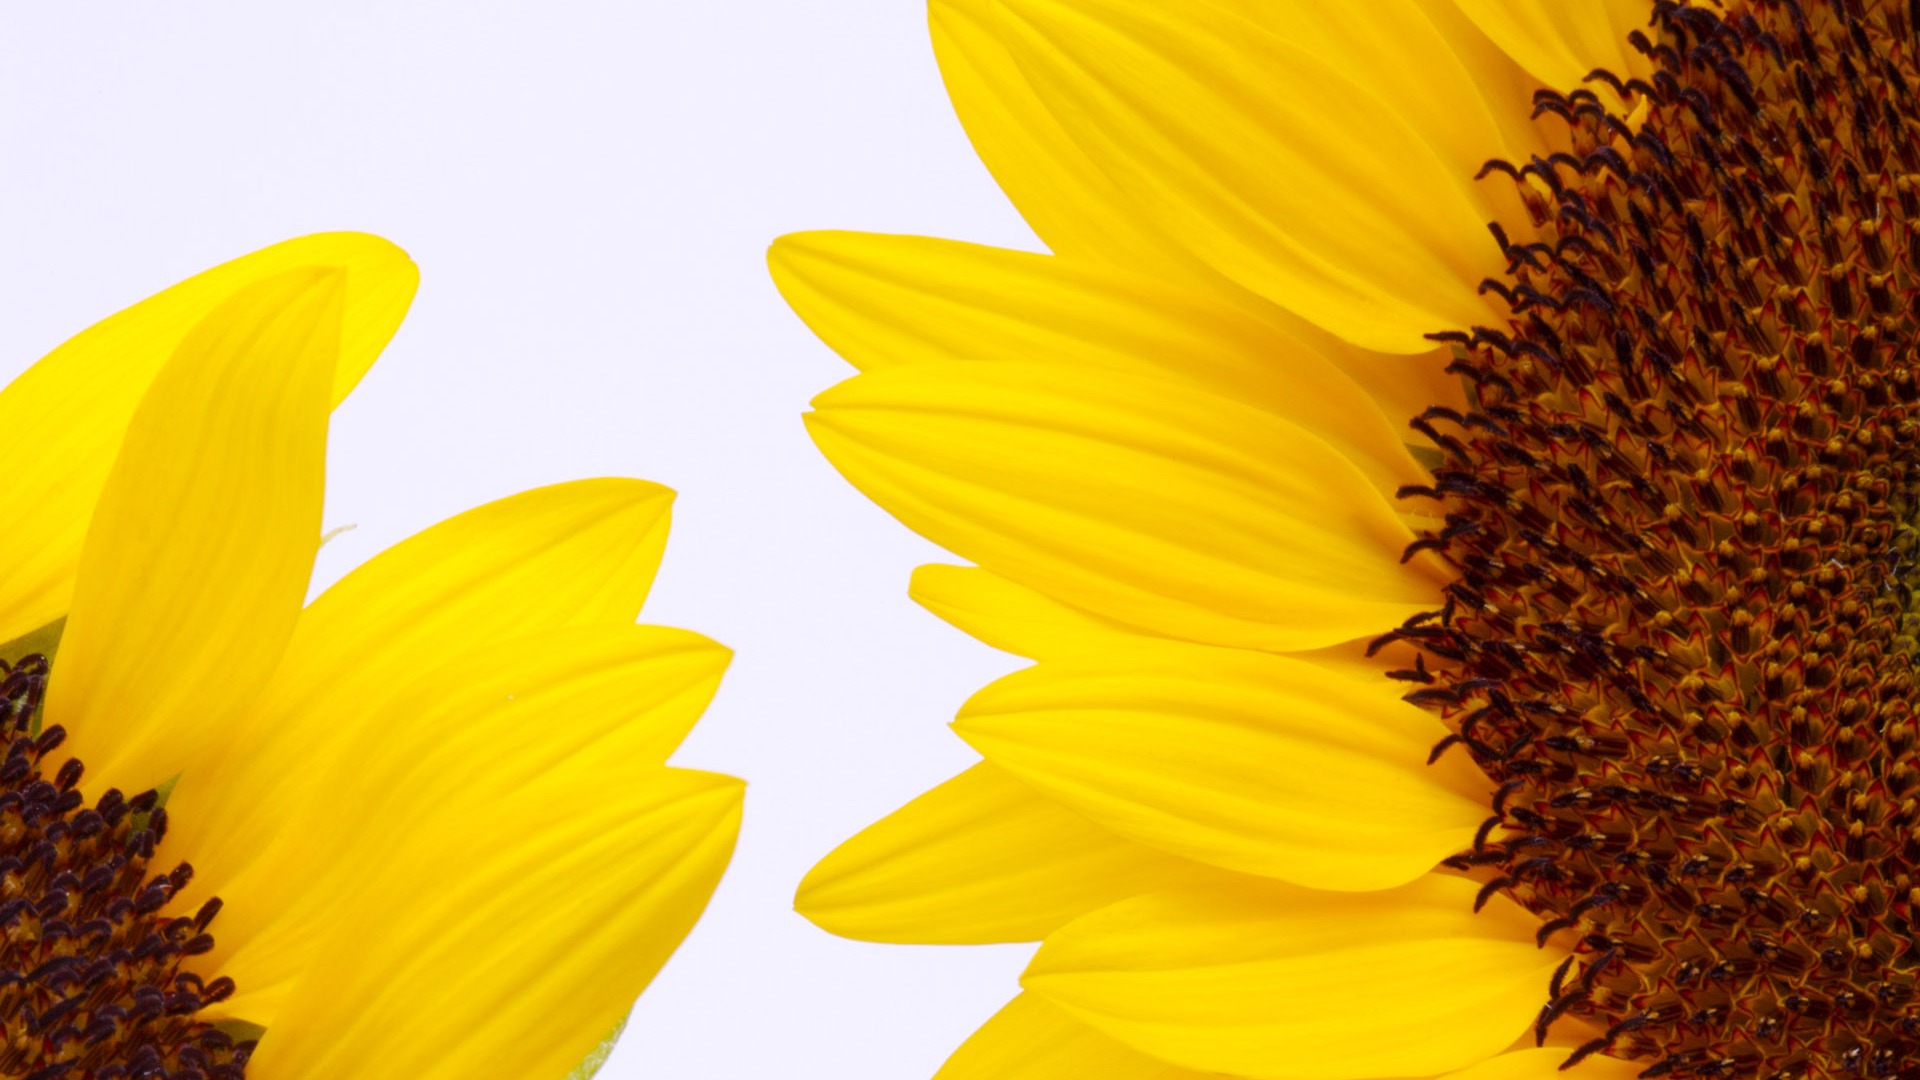 Sunny sunflower photo HD Wallpapers #31 - 1920x1080